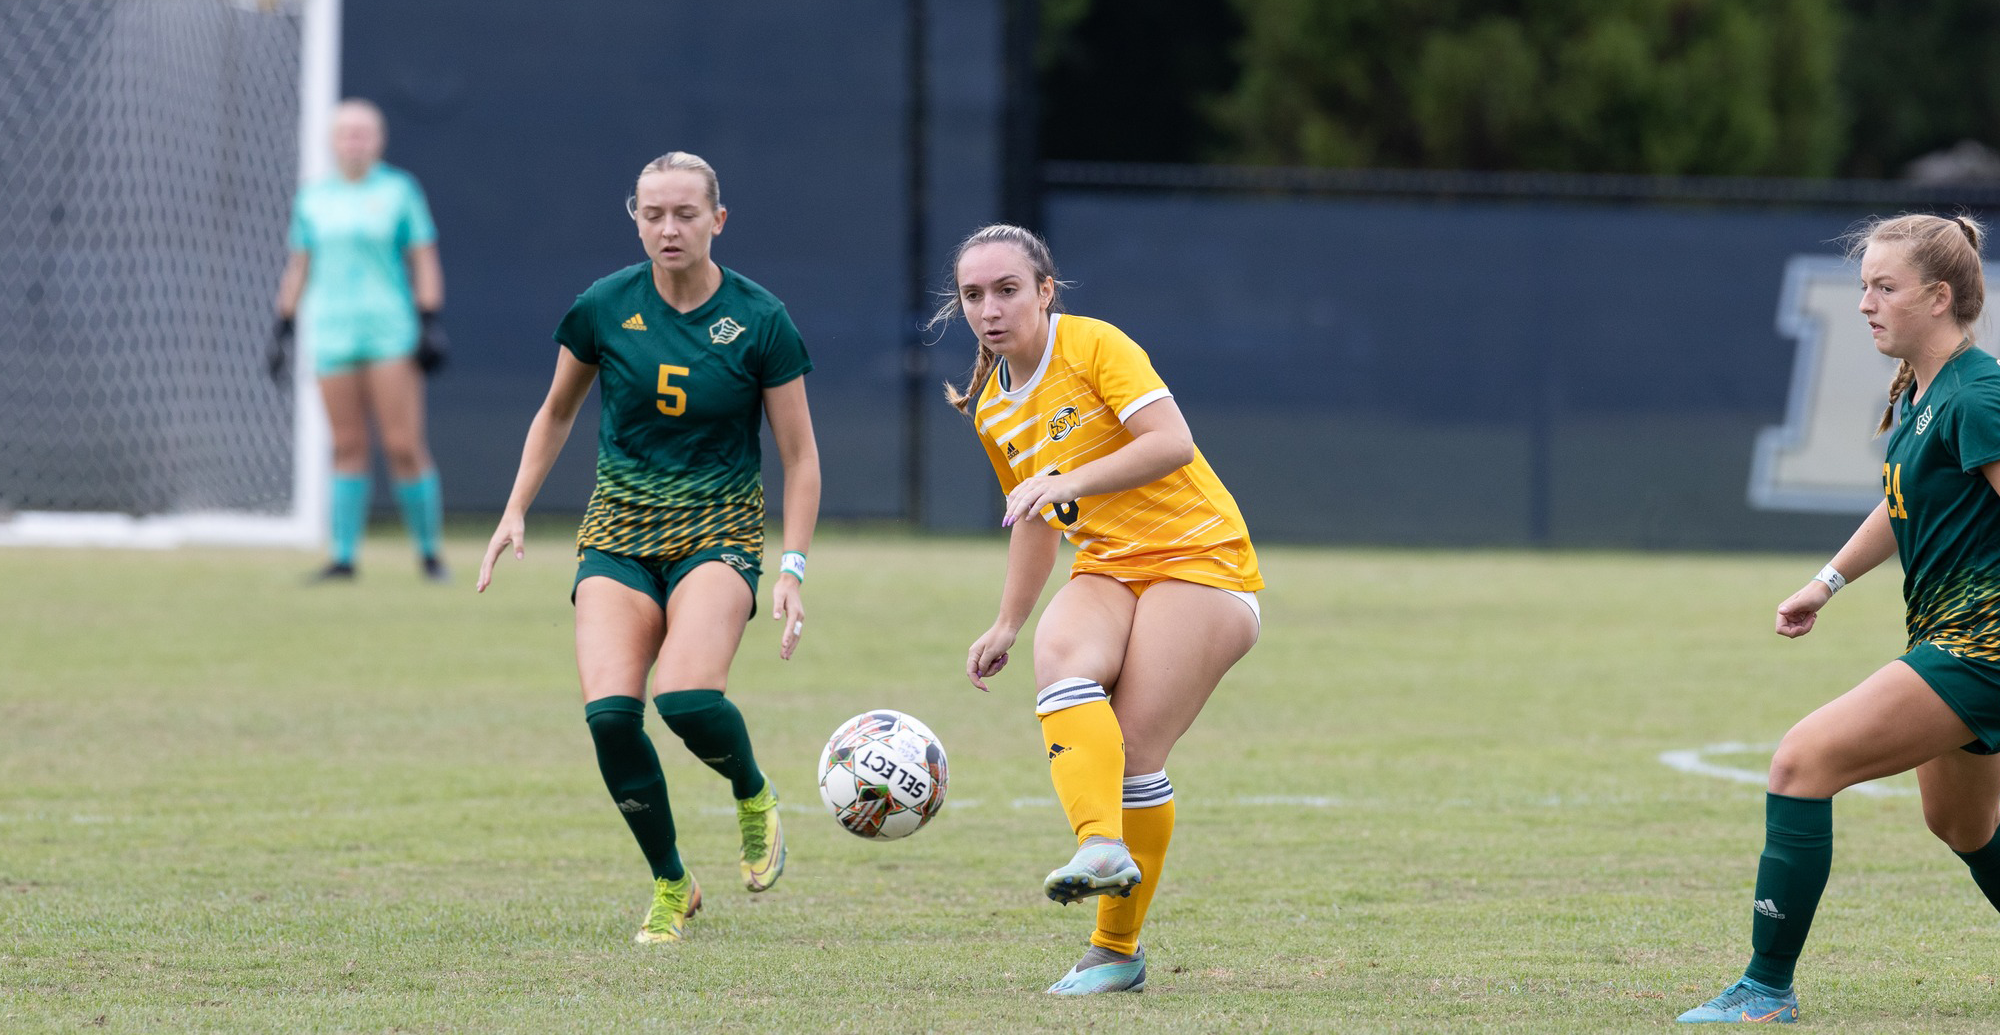 Canes Fall To Columbus State 2-0